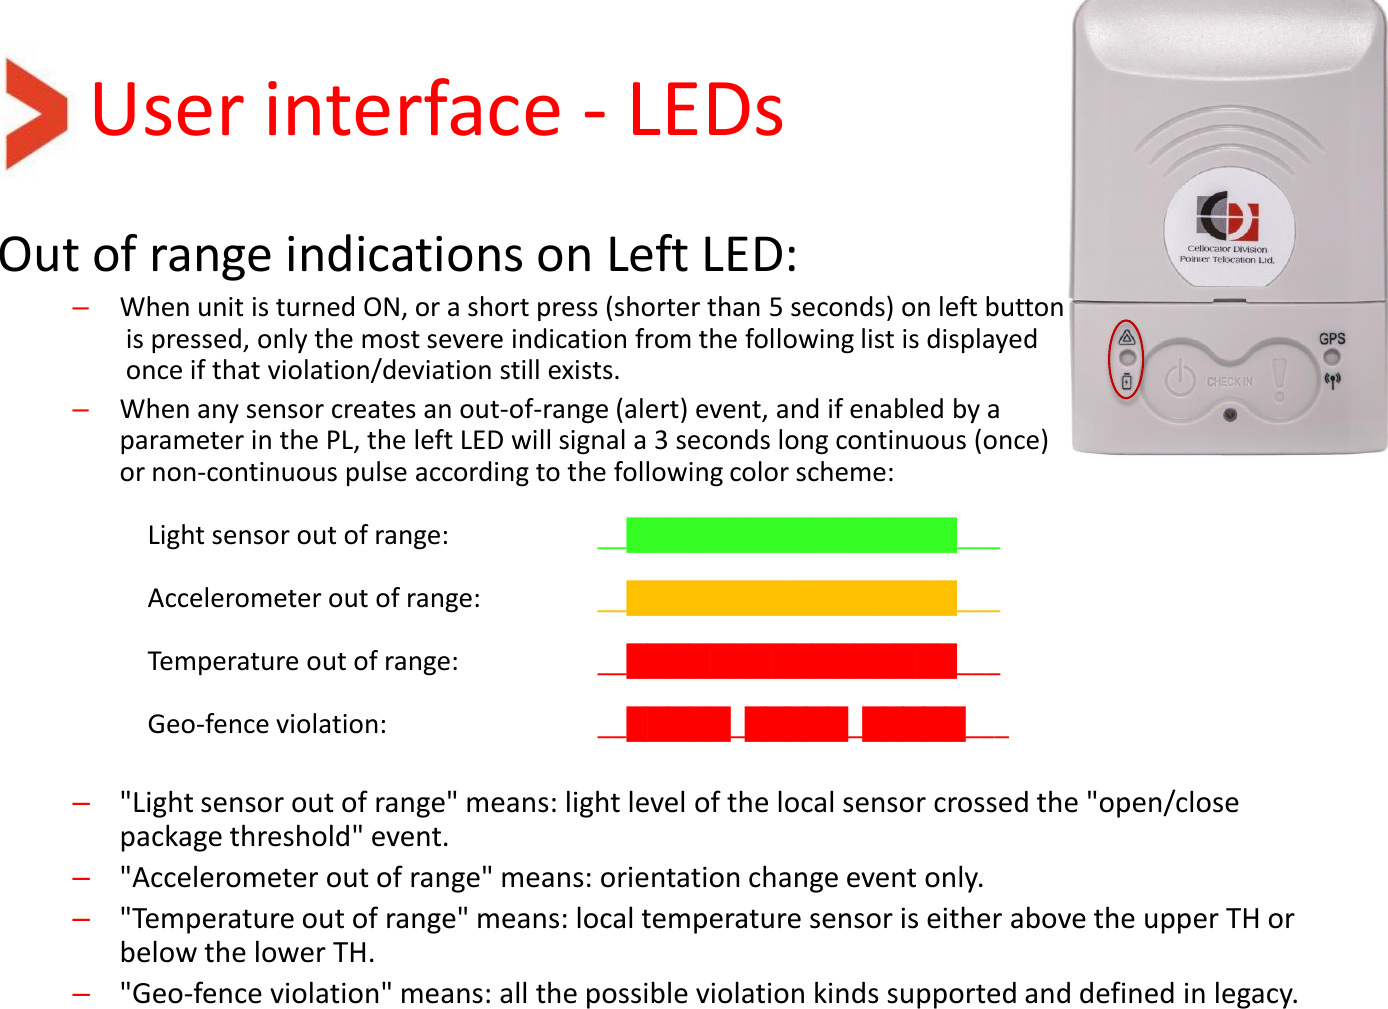 User interface - LEDs Out of range indications on Left LED: –When unit is turned ON, or a short press (shorter than 5 seconds) on left button  is pressed, only the most severe indication from the following list is displayed  once if that violation/deviation still exists.  –When any sensor creates an out-of-range (alert) event, and if enabled by a  parameter in the PL, the left LED will signal a 3 seconds long continuous (once)  or non-continuous pulse according to the following color scheme:   Light sensor out of range:     __████████████████___   Accelerometer out of range:          __████████████████___    Temperature out of range:     __████████████████___   Geo-fence violation:       __█████_█████_█████___   –&quot;Light sensor out of range&quot; means: light level of the local sensor crossed the &quot;open/close package threshold&quot; event. –&quot;Accelerometer out of range&quot; means: orientation change event only. –&quot;Temperature out of range&quot; means: local temperature sensor is either above the upper TH or below the lower TH.  –&quot;Geo-fence violation&quot; means: all the possible violation kinds supported and defined in legacy.  